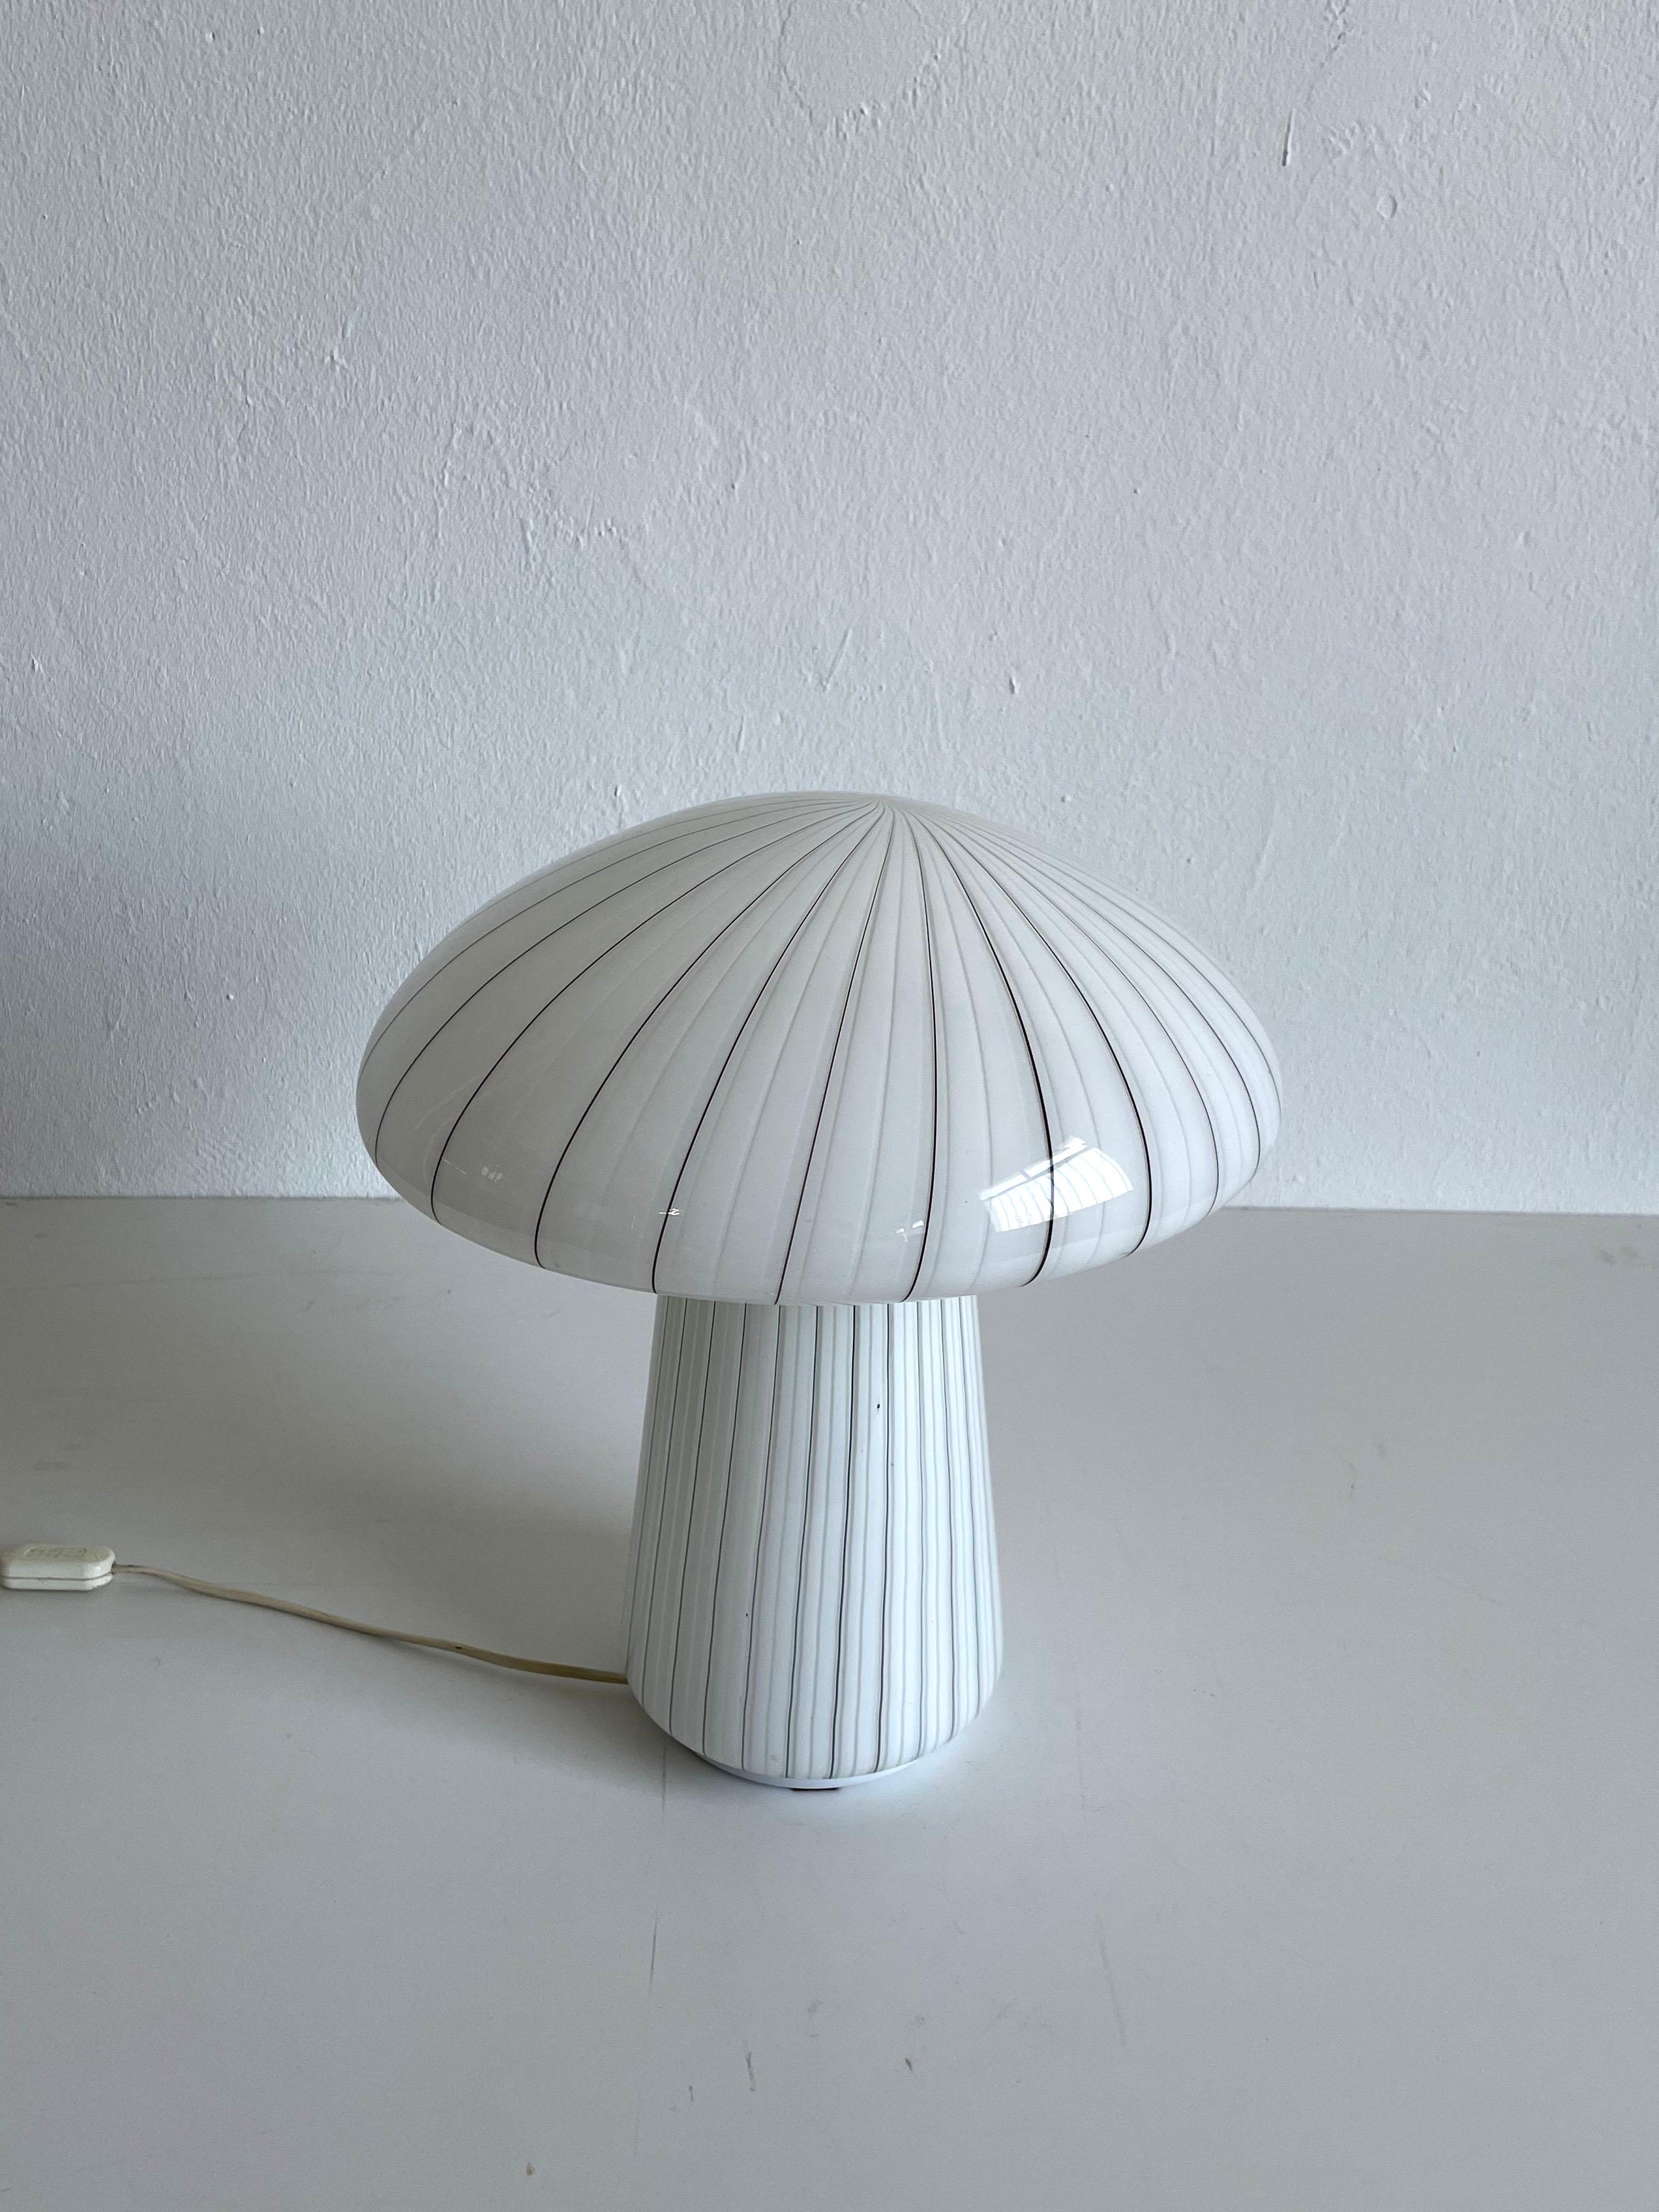 Late 20th Century Large White Glass Swirl Murano Mushroom Table Lamp, Italy 1970s For Sale